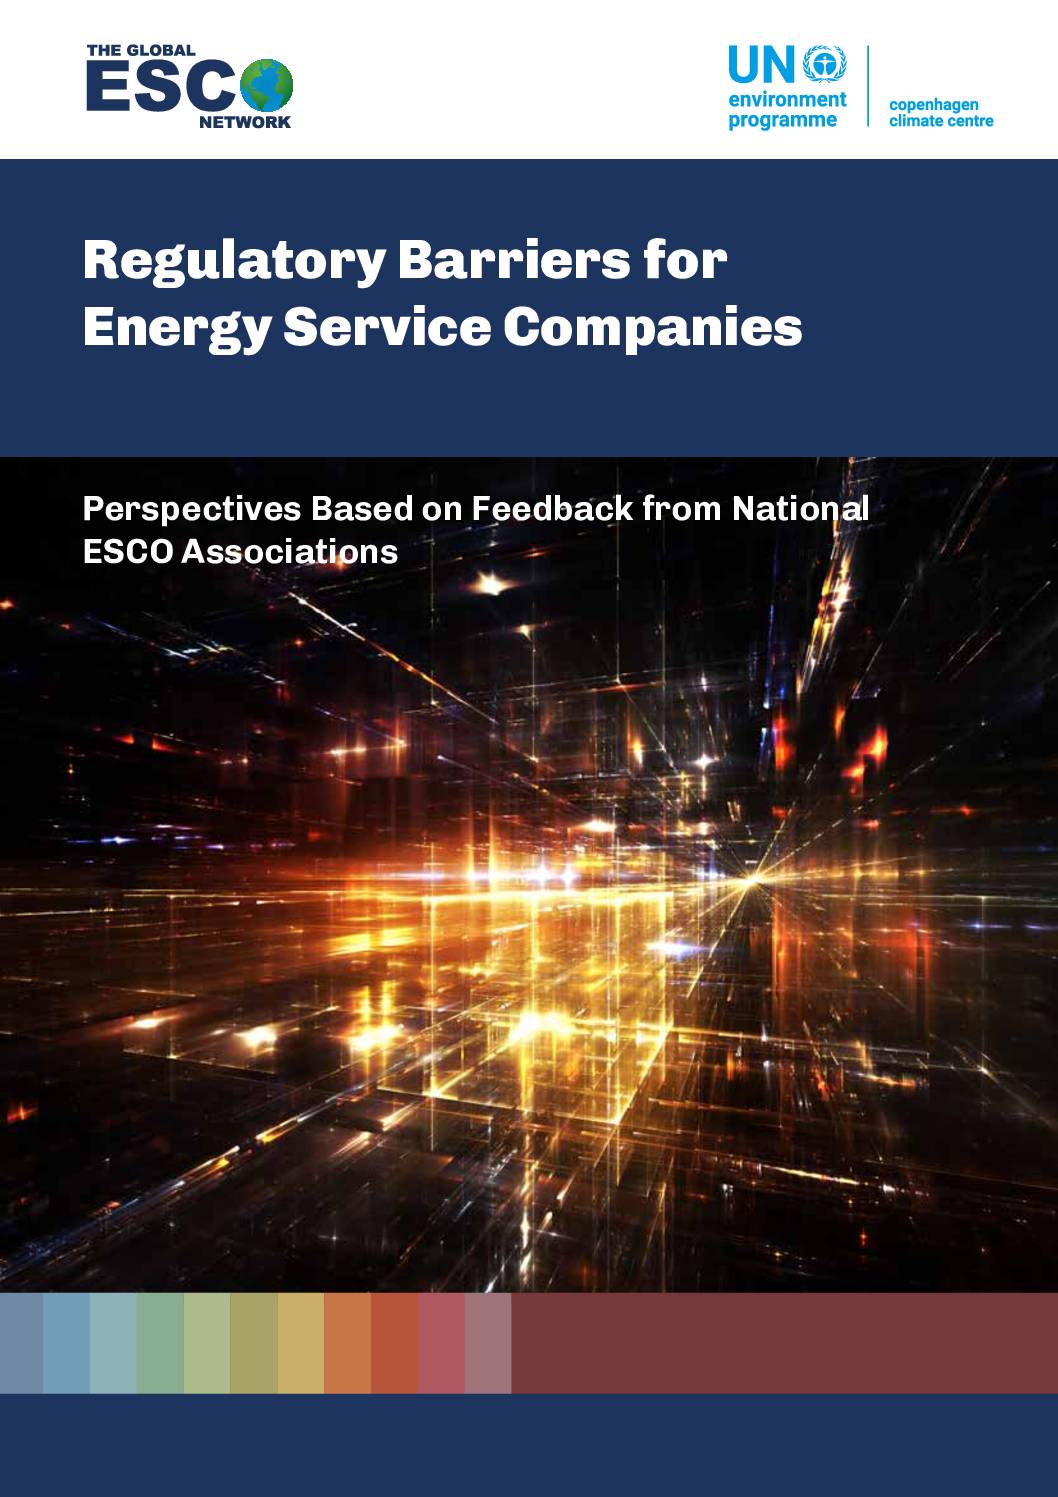 Regulatory Barriers for Energy Service Companies. Perspectives Based on Feedback from National ESCO Associations